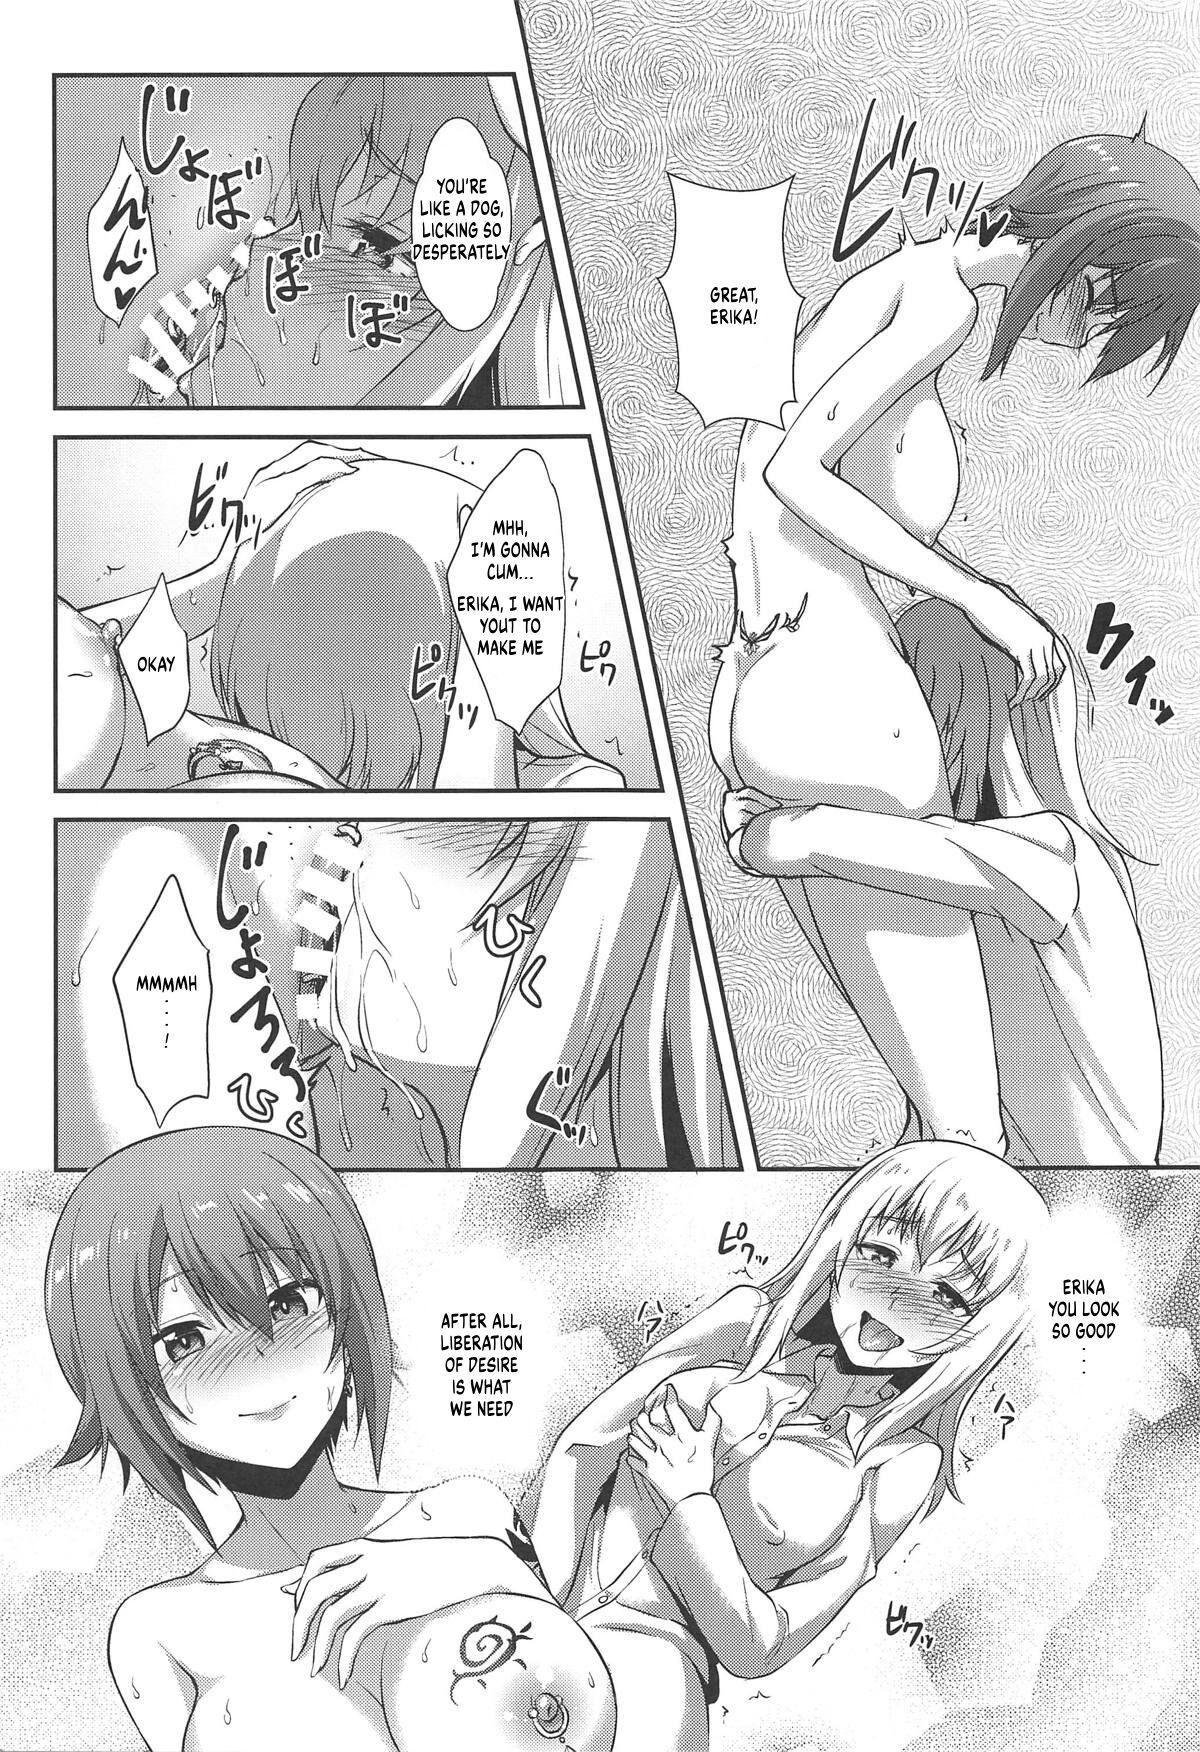 Music The Way How a Matriarch is Brought Up - Maho's Case, Bottom - Girls und panzer Leather - Page 11